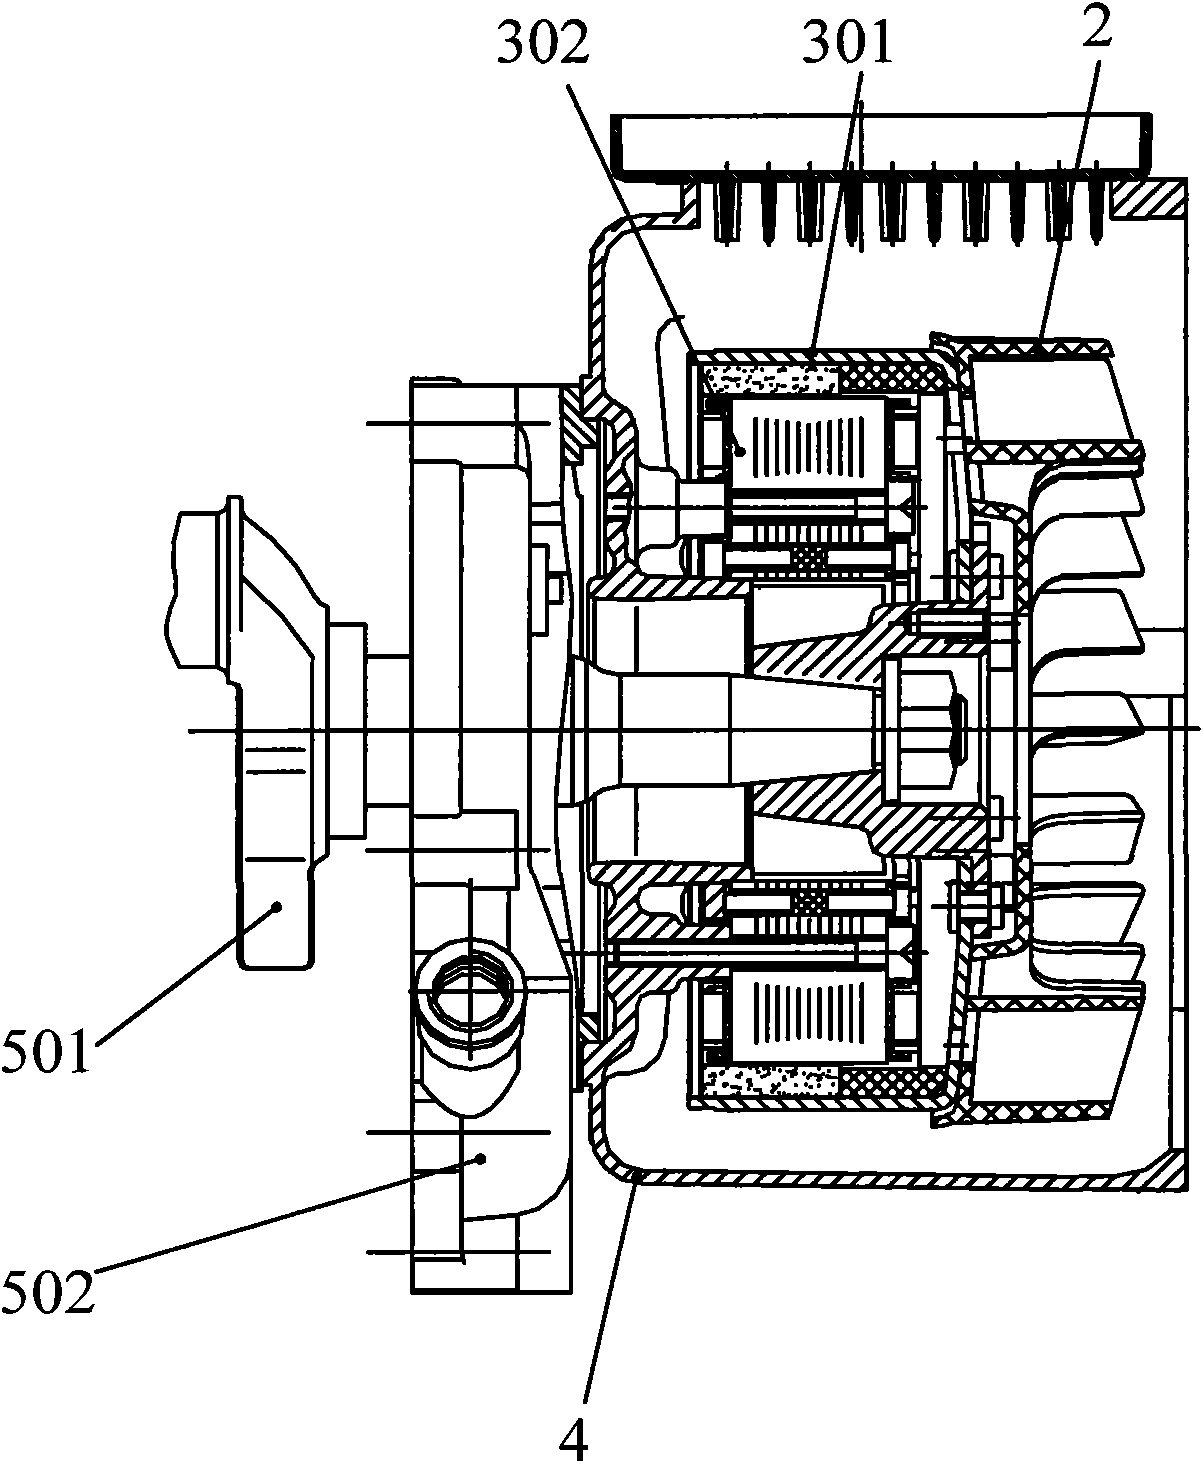 Single-power driven double-generator set using electric injection system